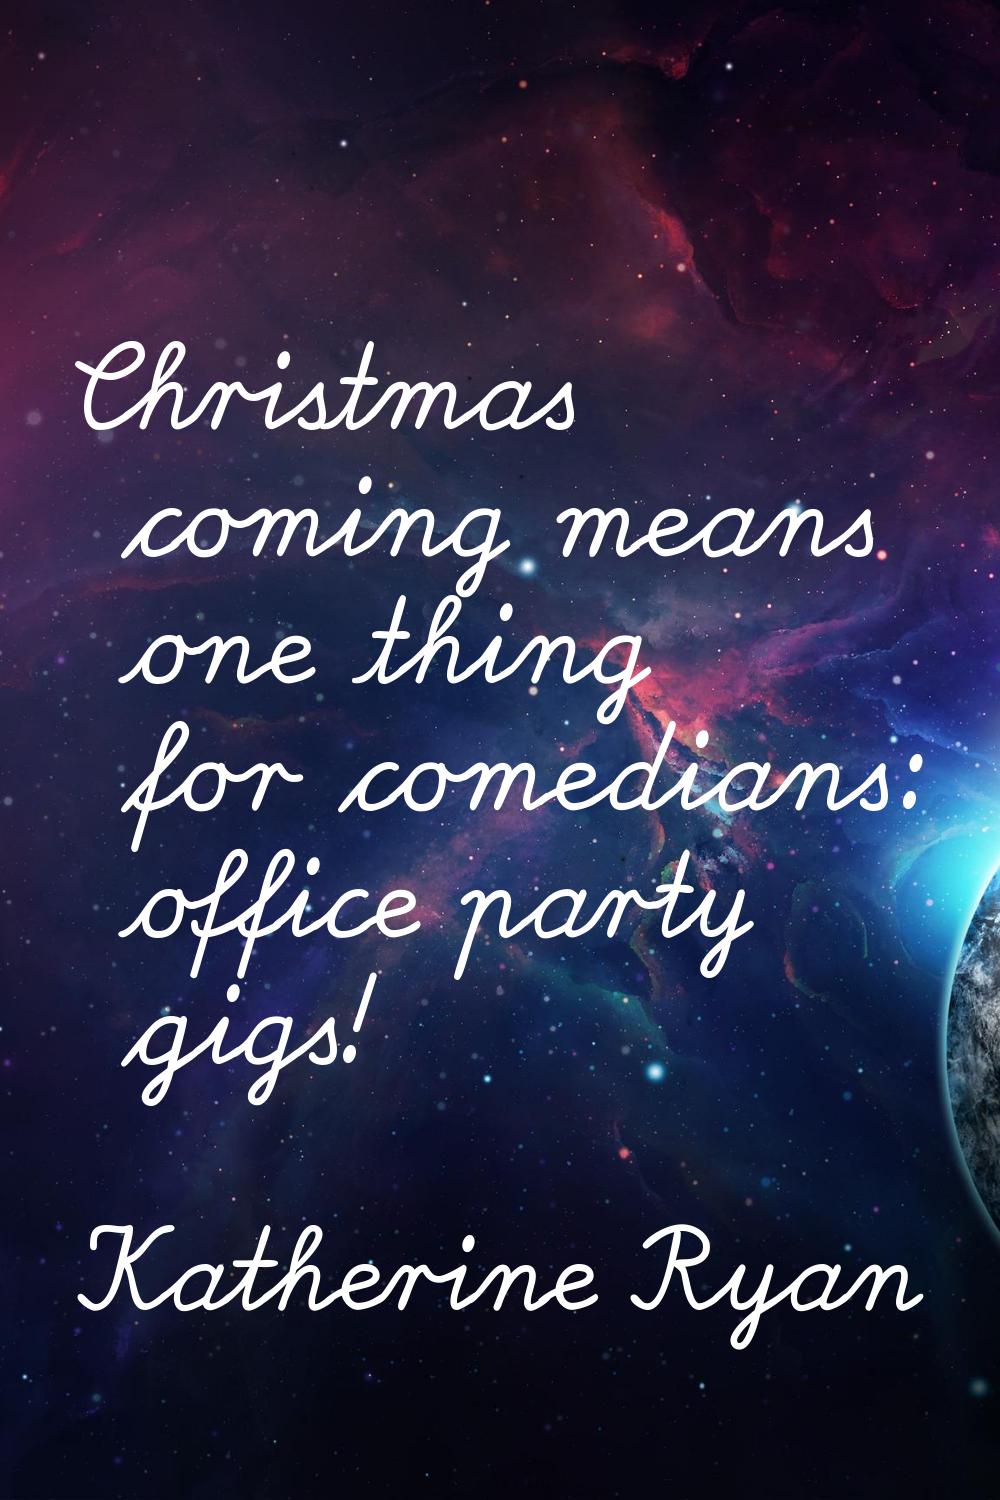 Christmas coming means one thing for comedians: office party gigs!